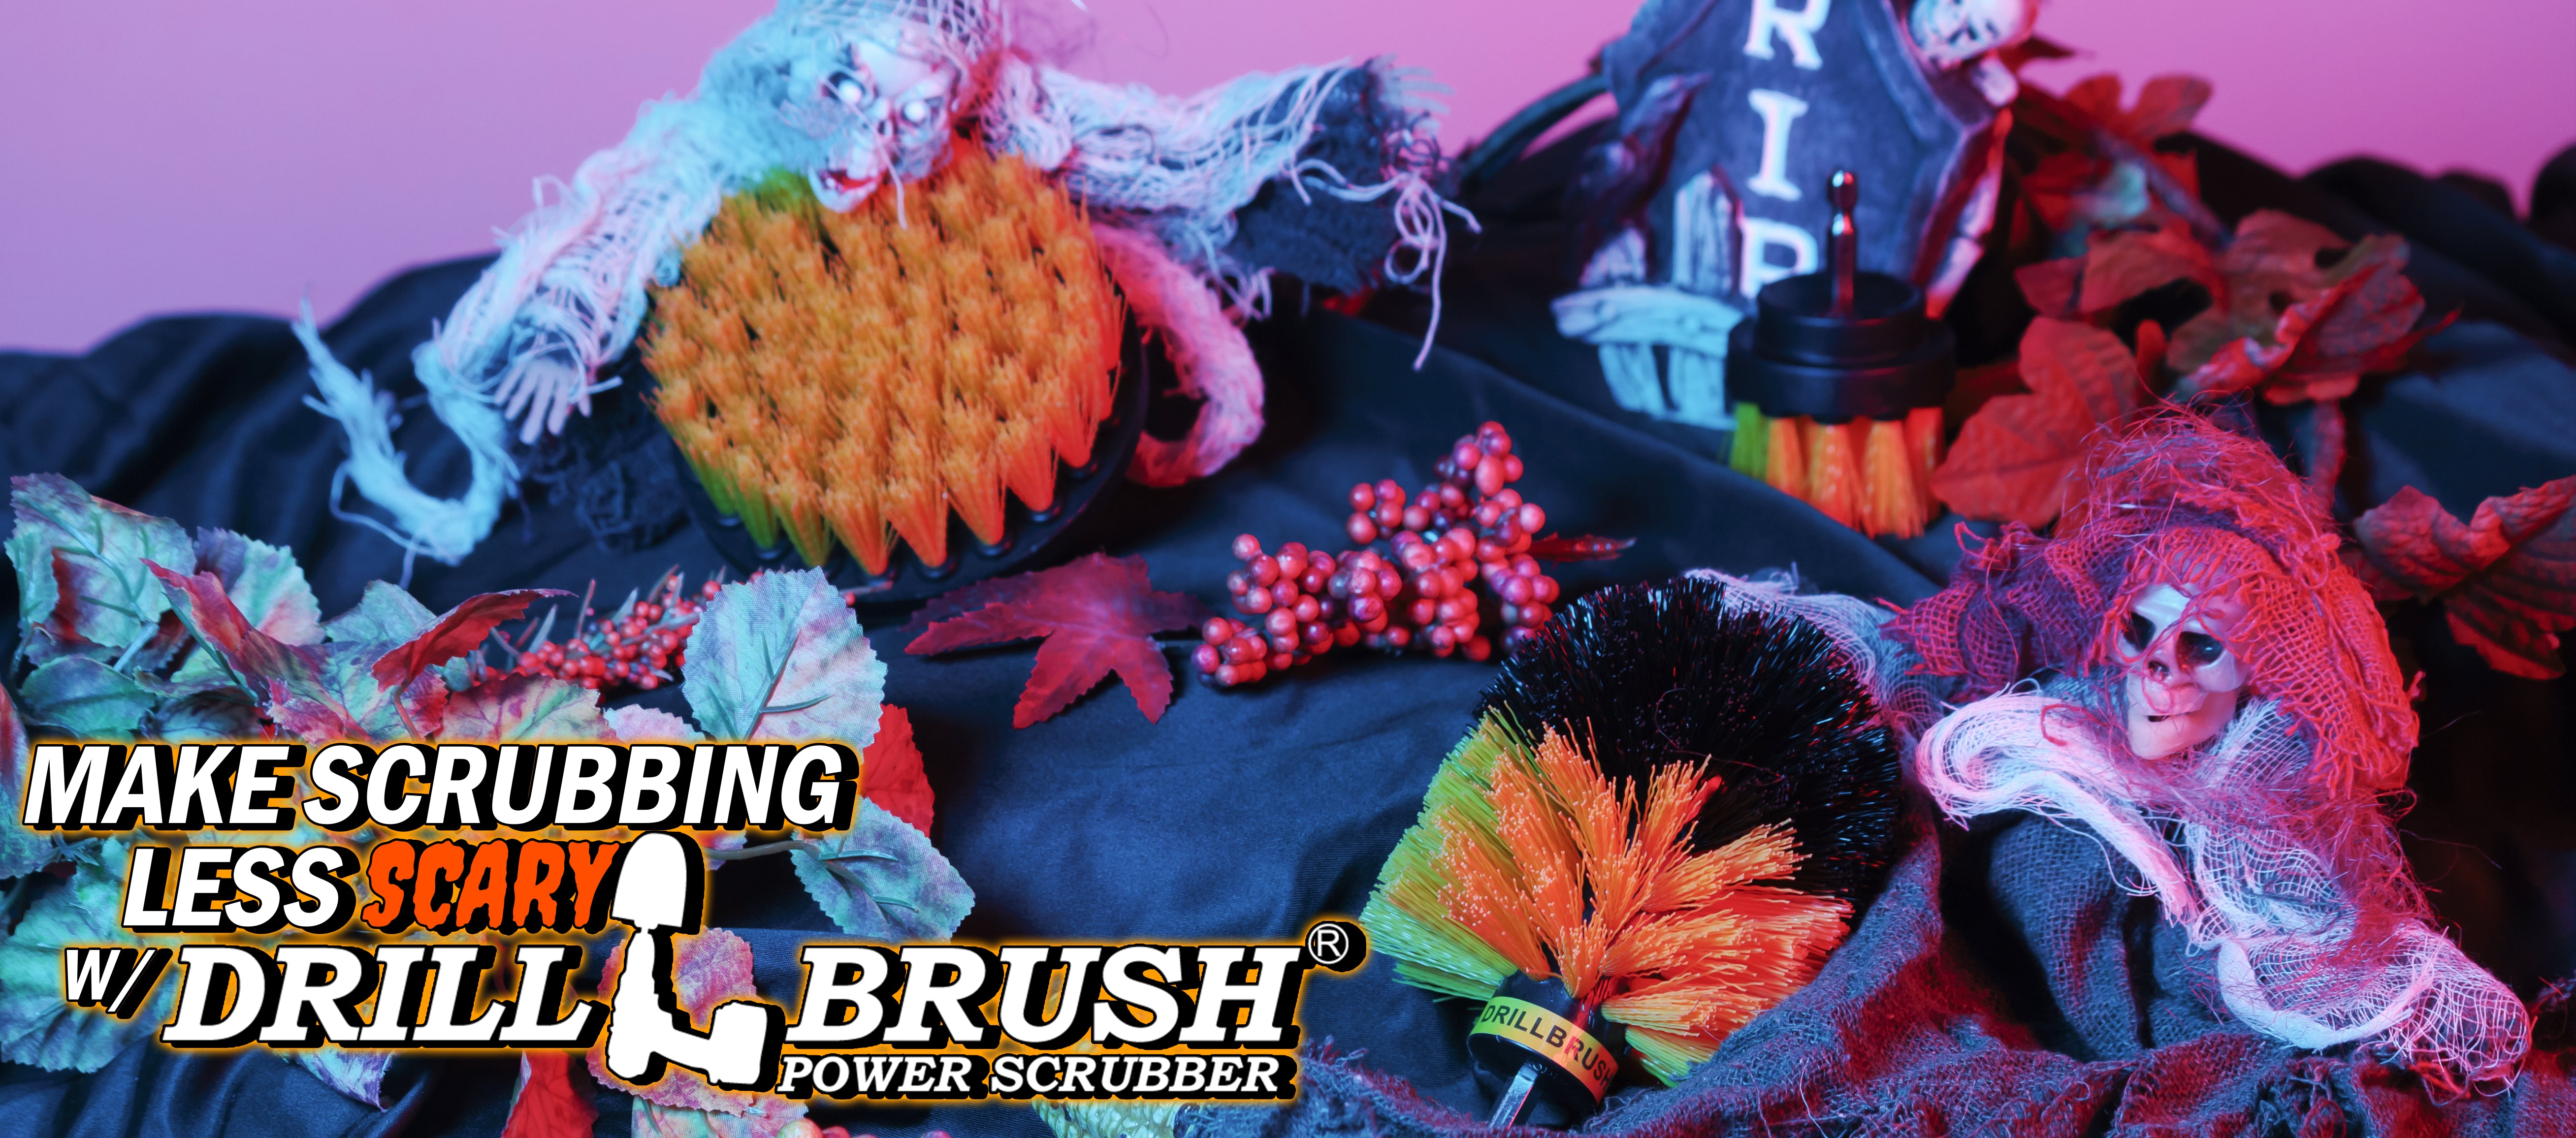 How Drillbrush Makes Scrubbing Less Scary!